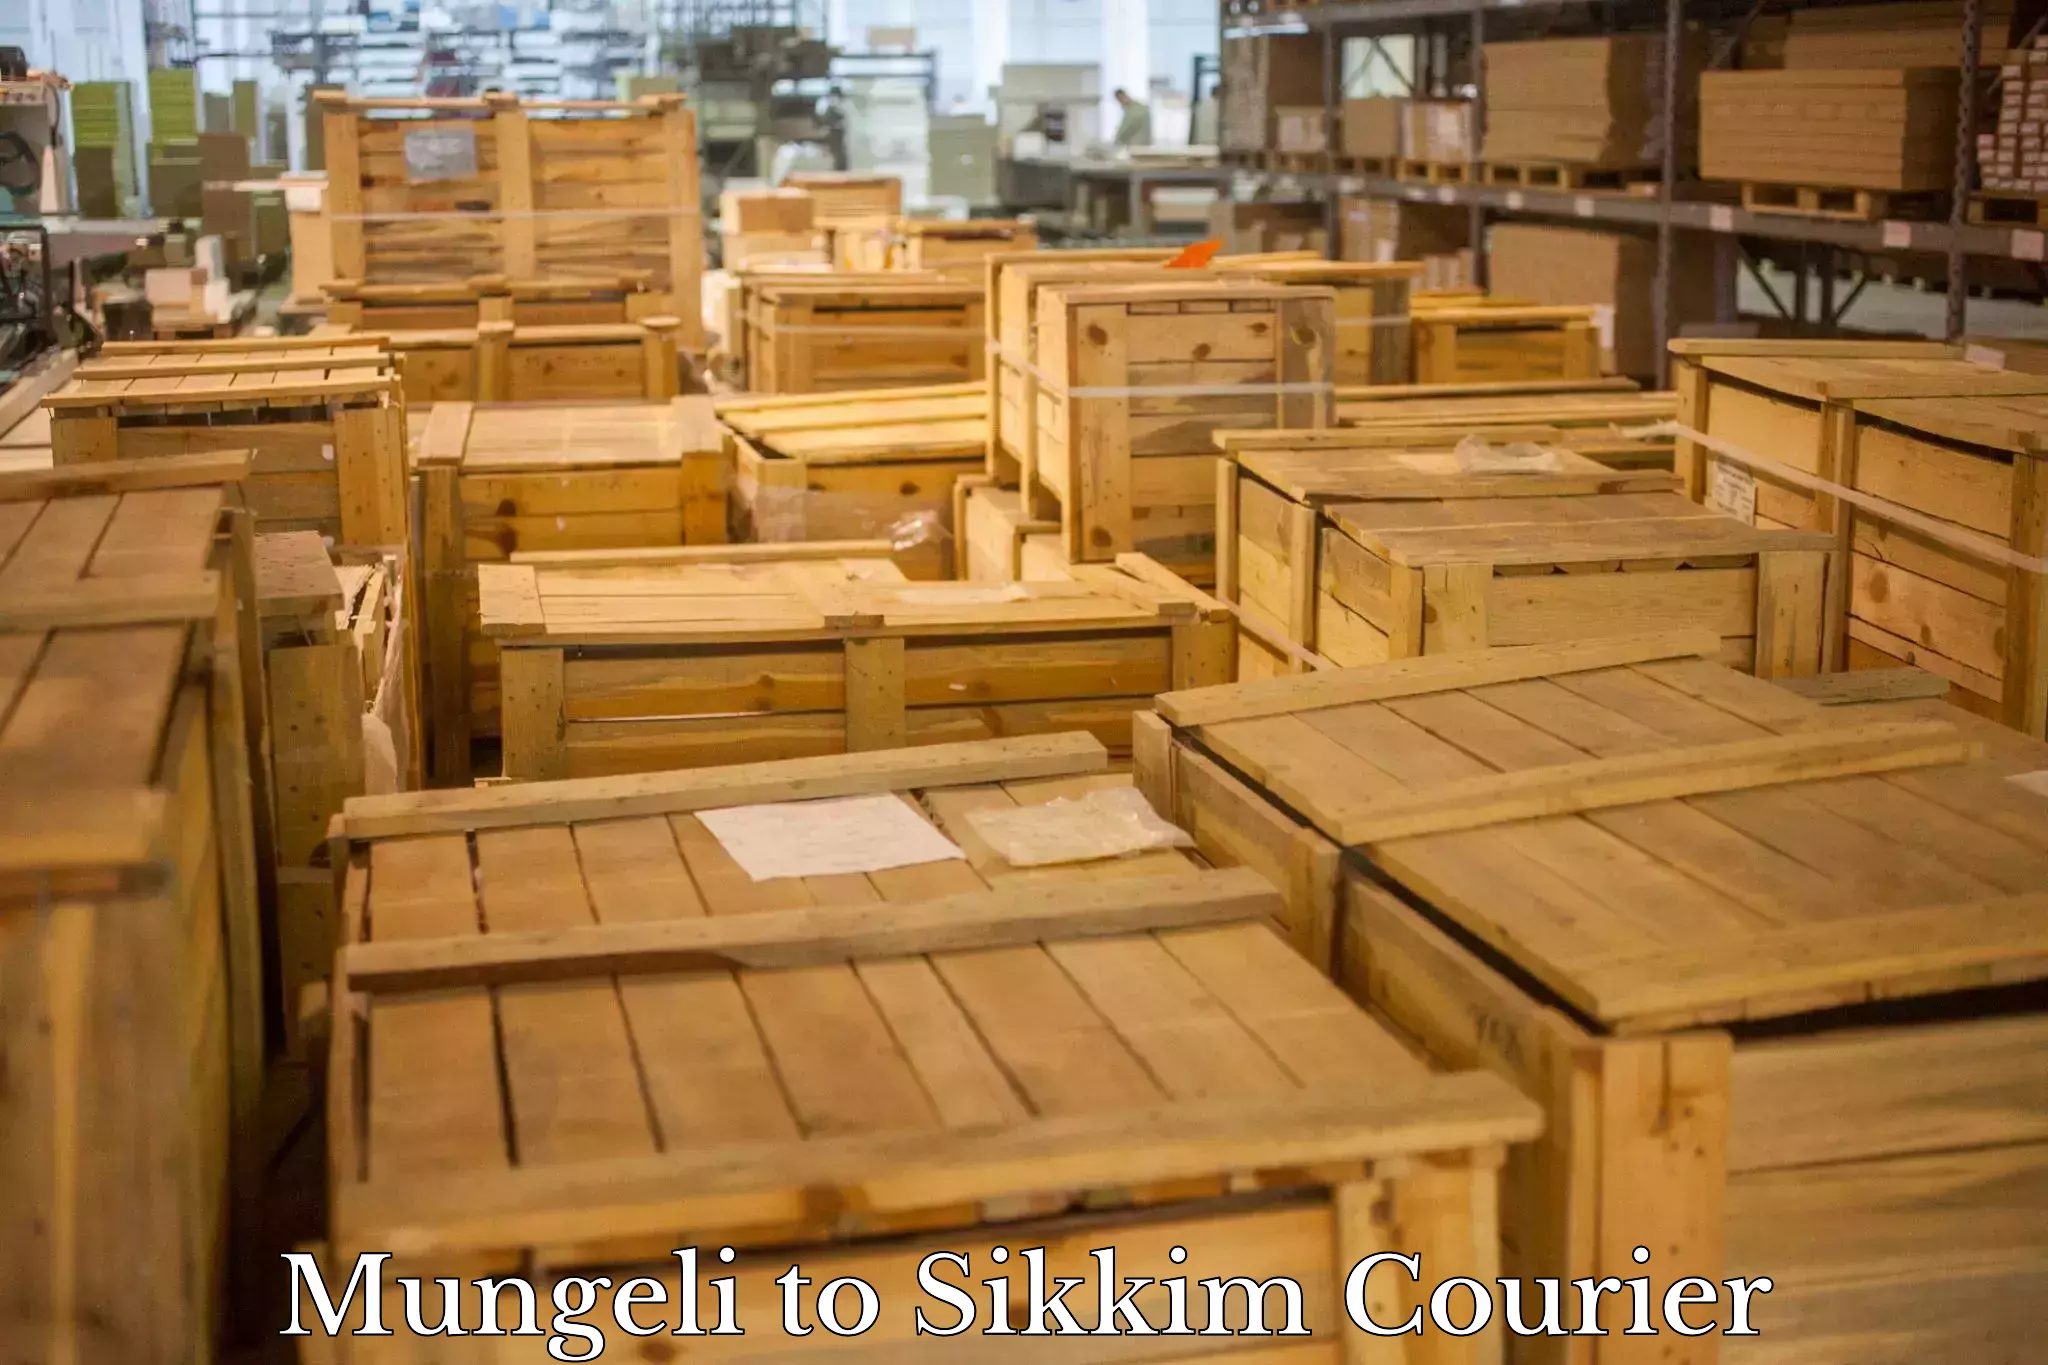 Global shipping networks Mungeli to Sikkim